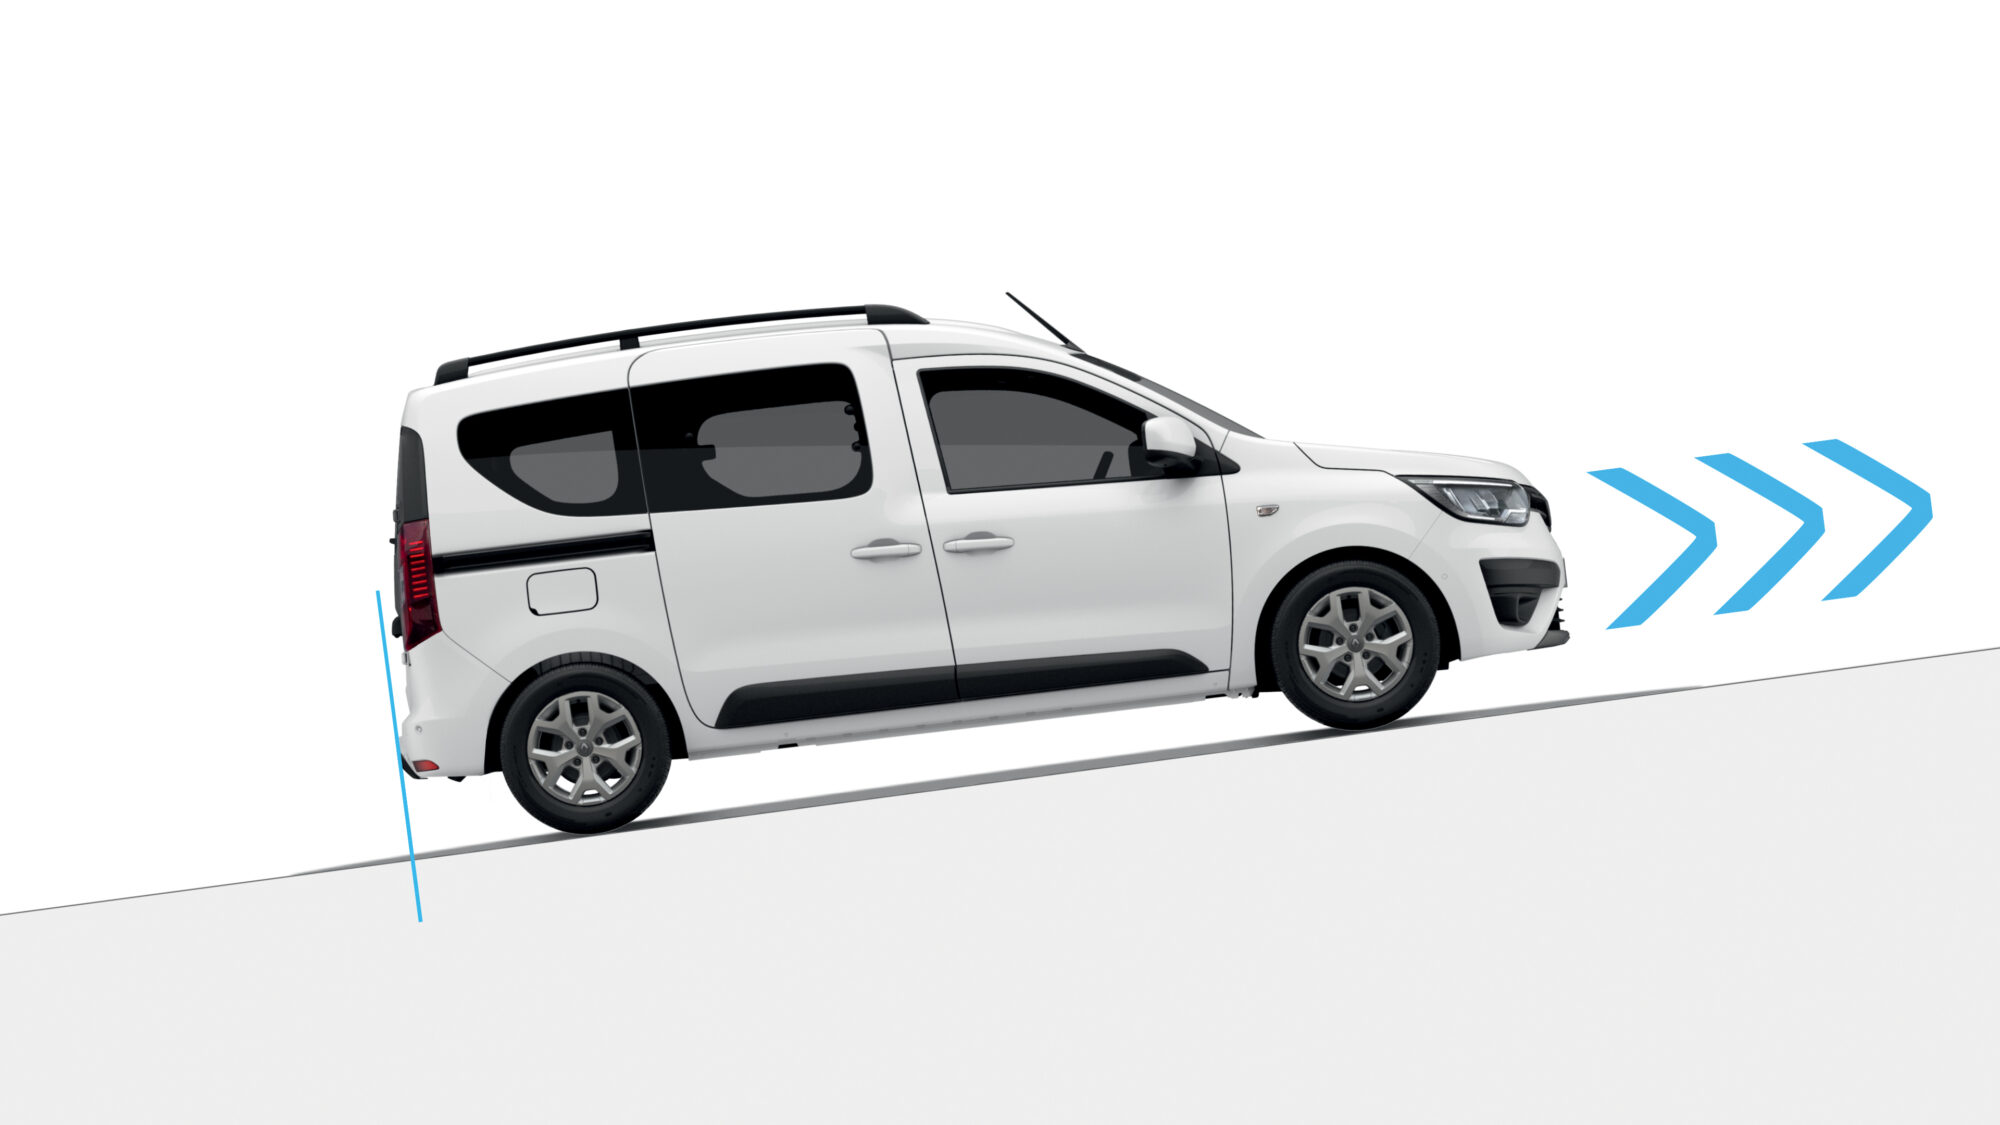 2021 - New Renault Express - Technical Drawings